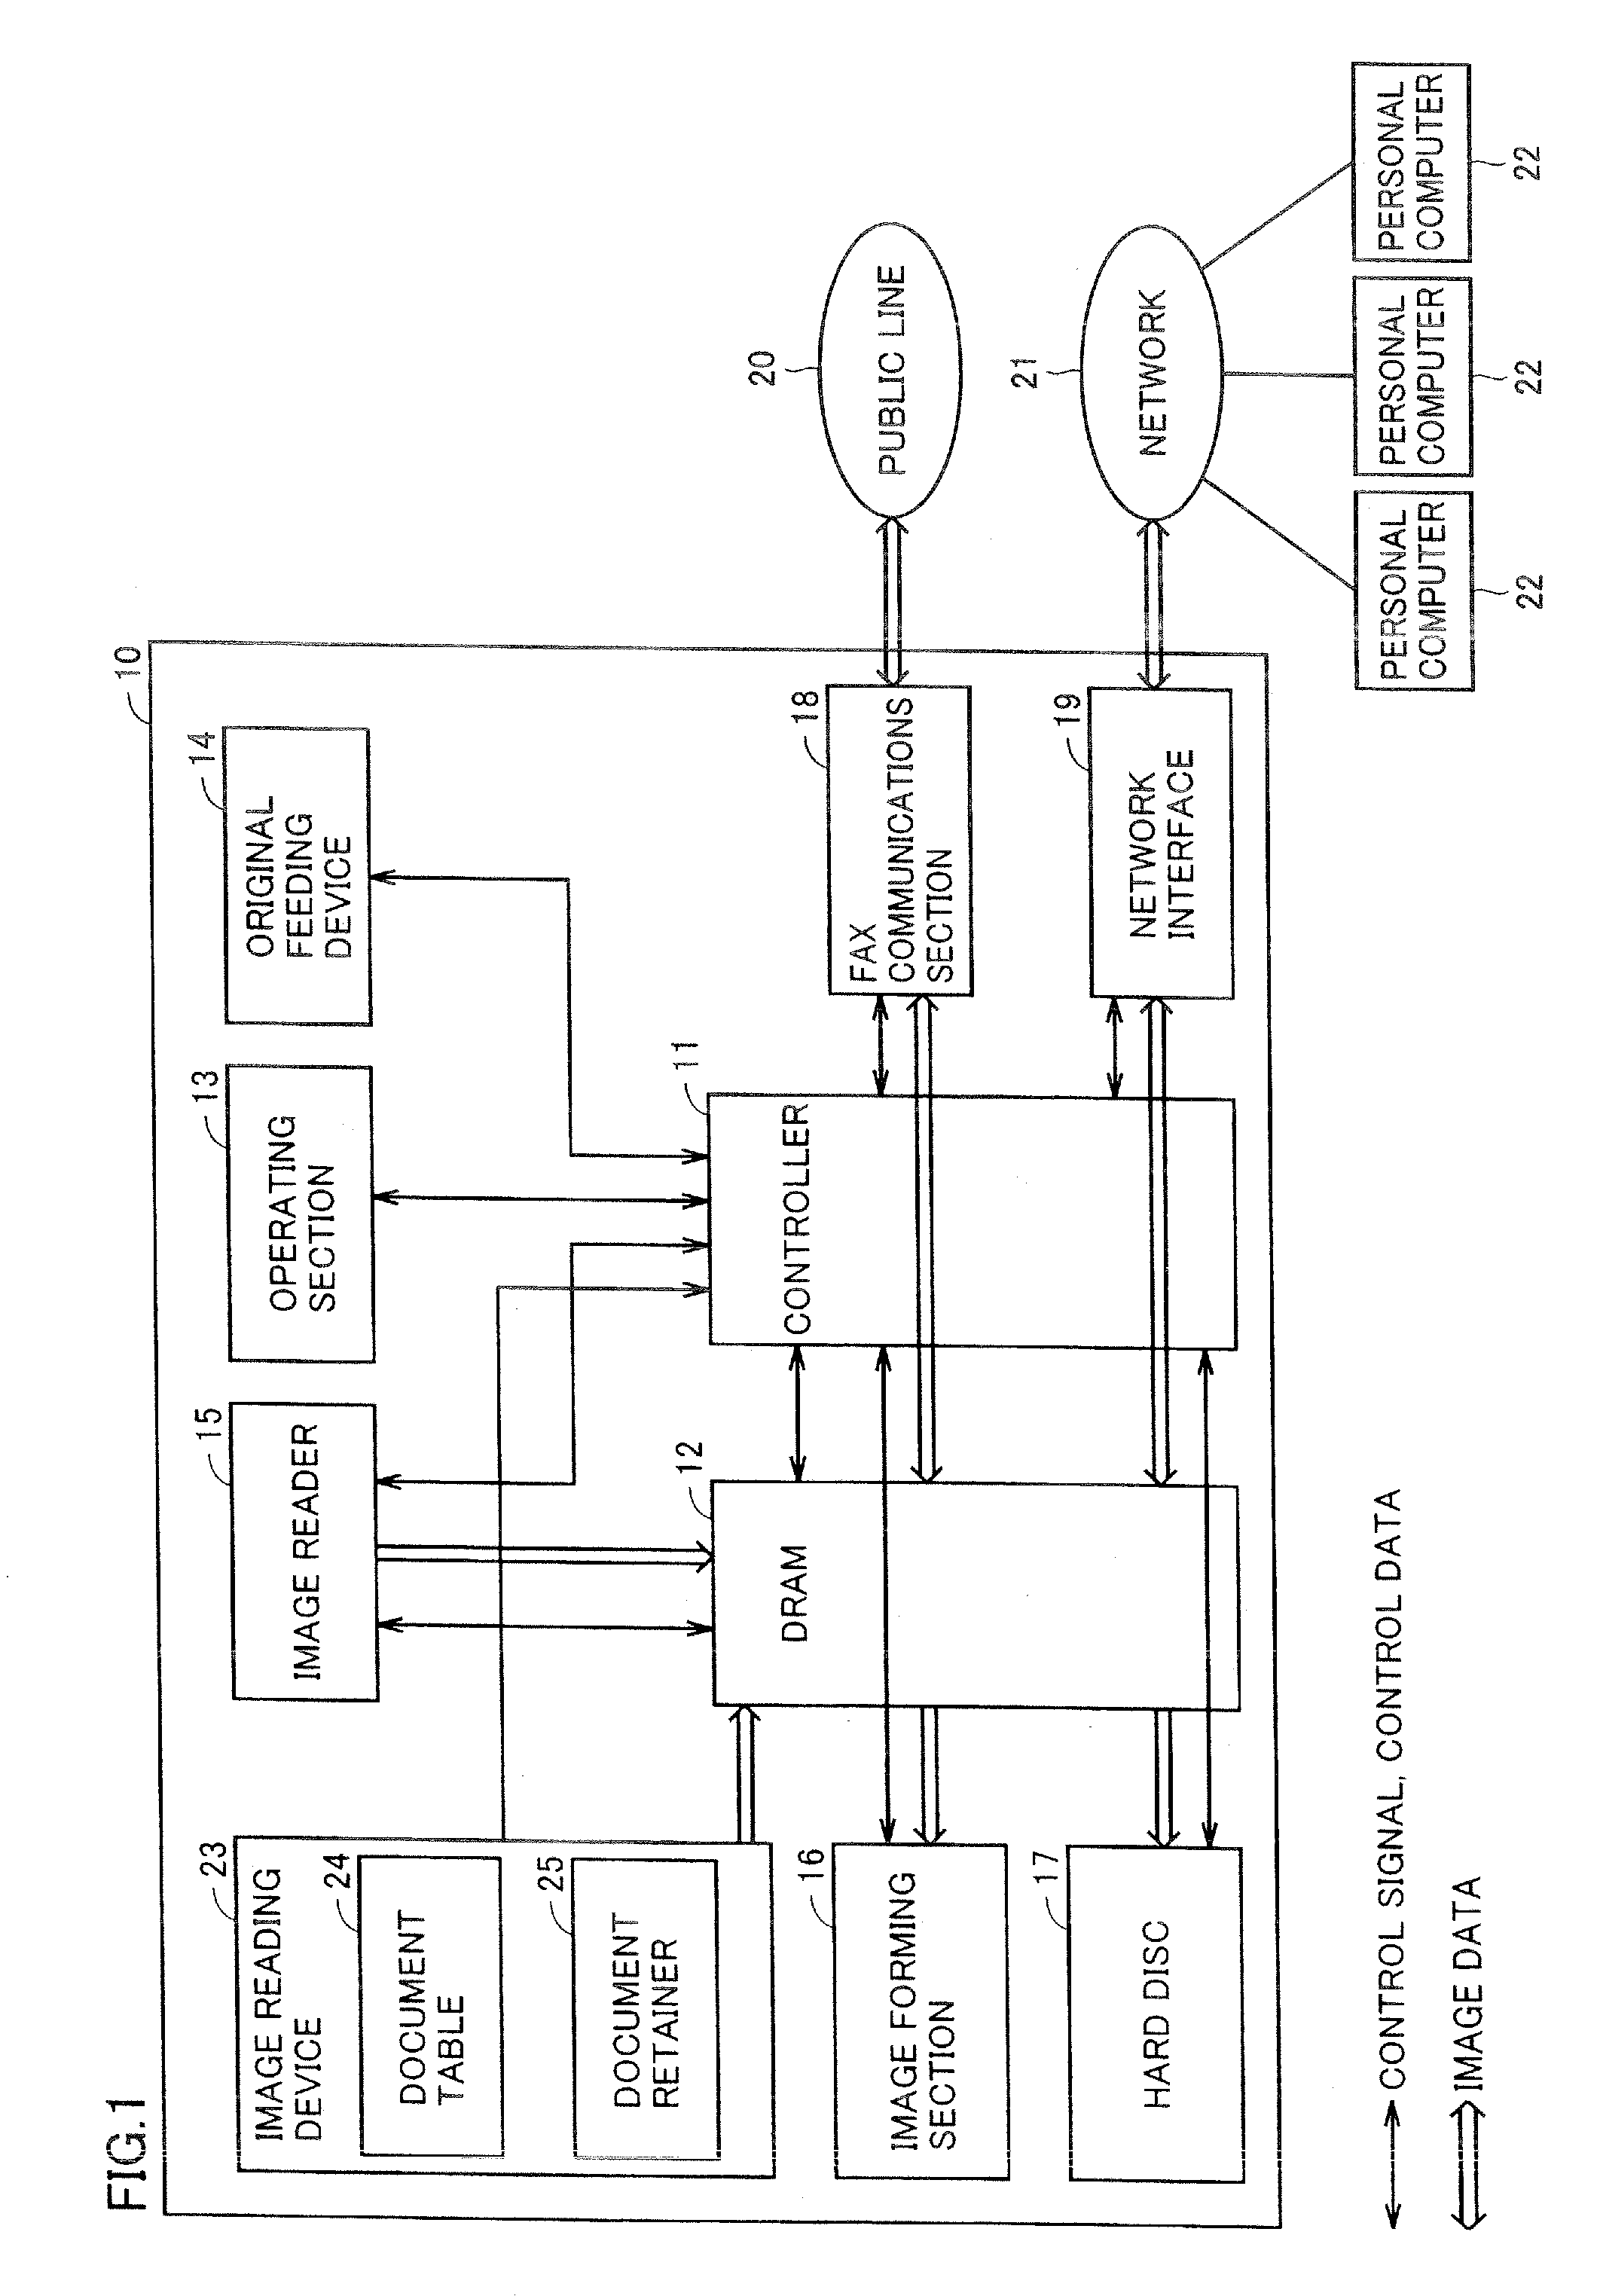 Image reading device and image forming apparatus